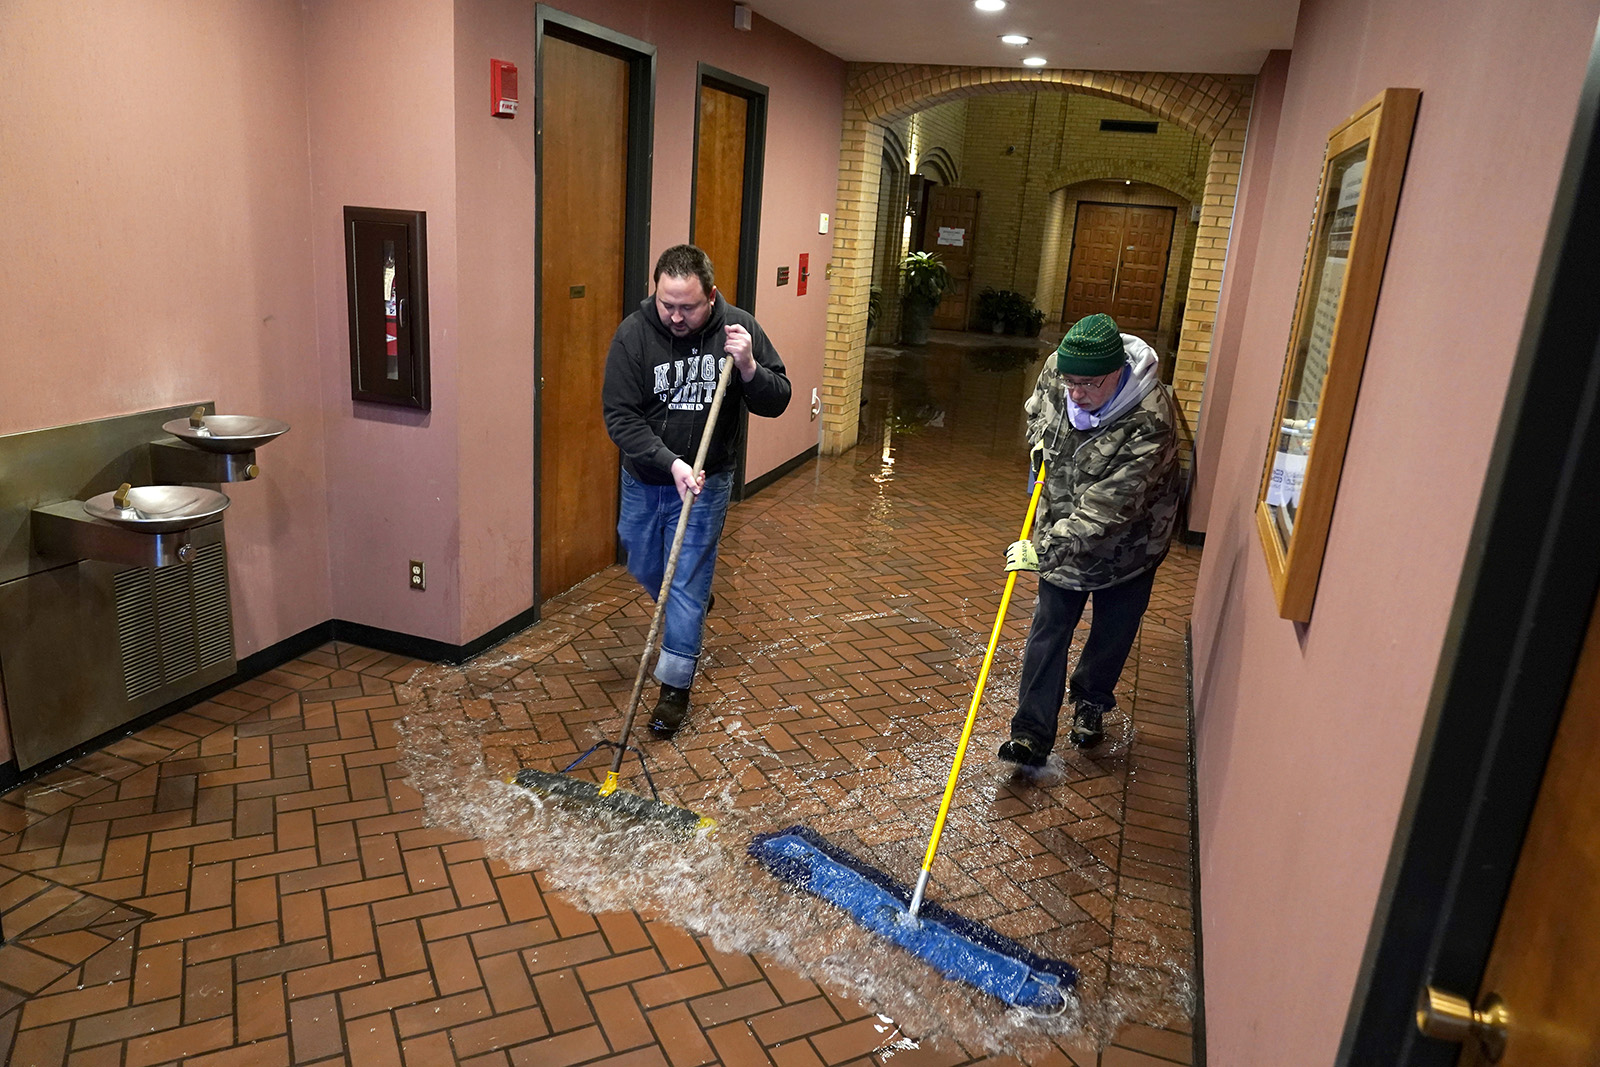 The Rev. John Szatkowski, left, and Deacon Bob Bonomi sweep water out of St. Paul The Apostle Church in Richardson, Texas, Wednesday, Feb. 17, 2021. Father Szatkowski and his staff found the flooding, from a broken water line, as they prepared for Ash Wednesday services. (AP Photo/Tony Gutierrez)